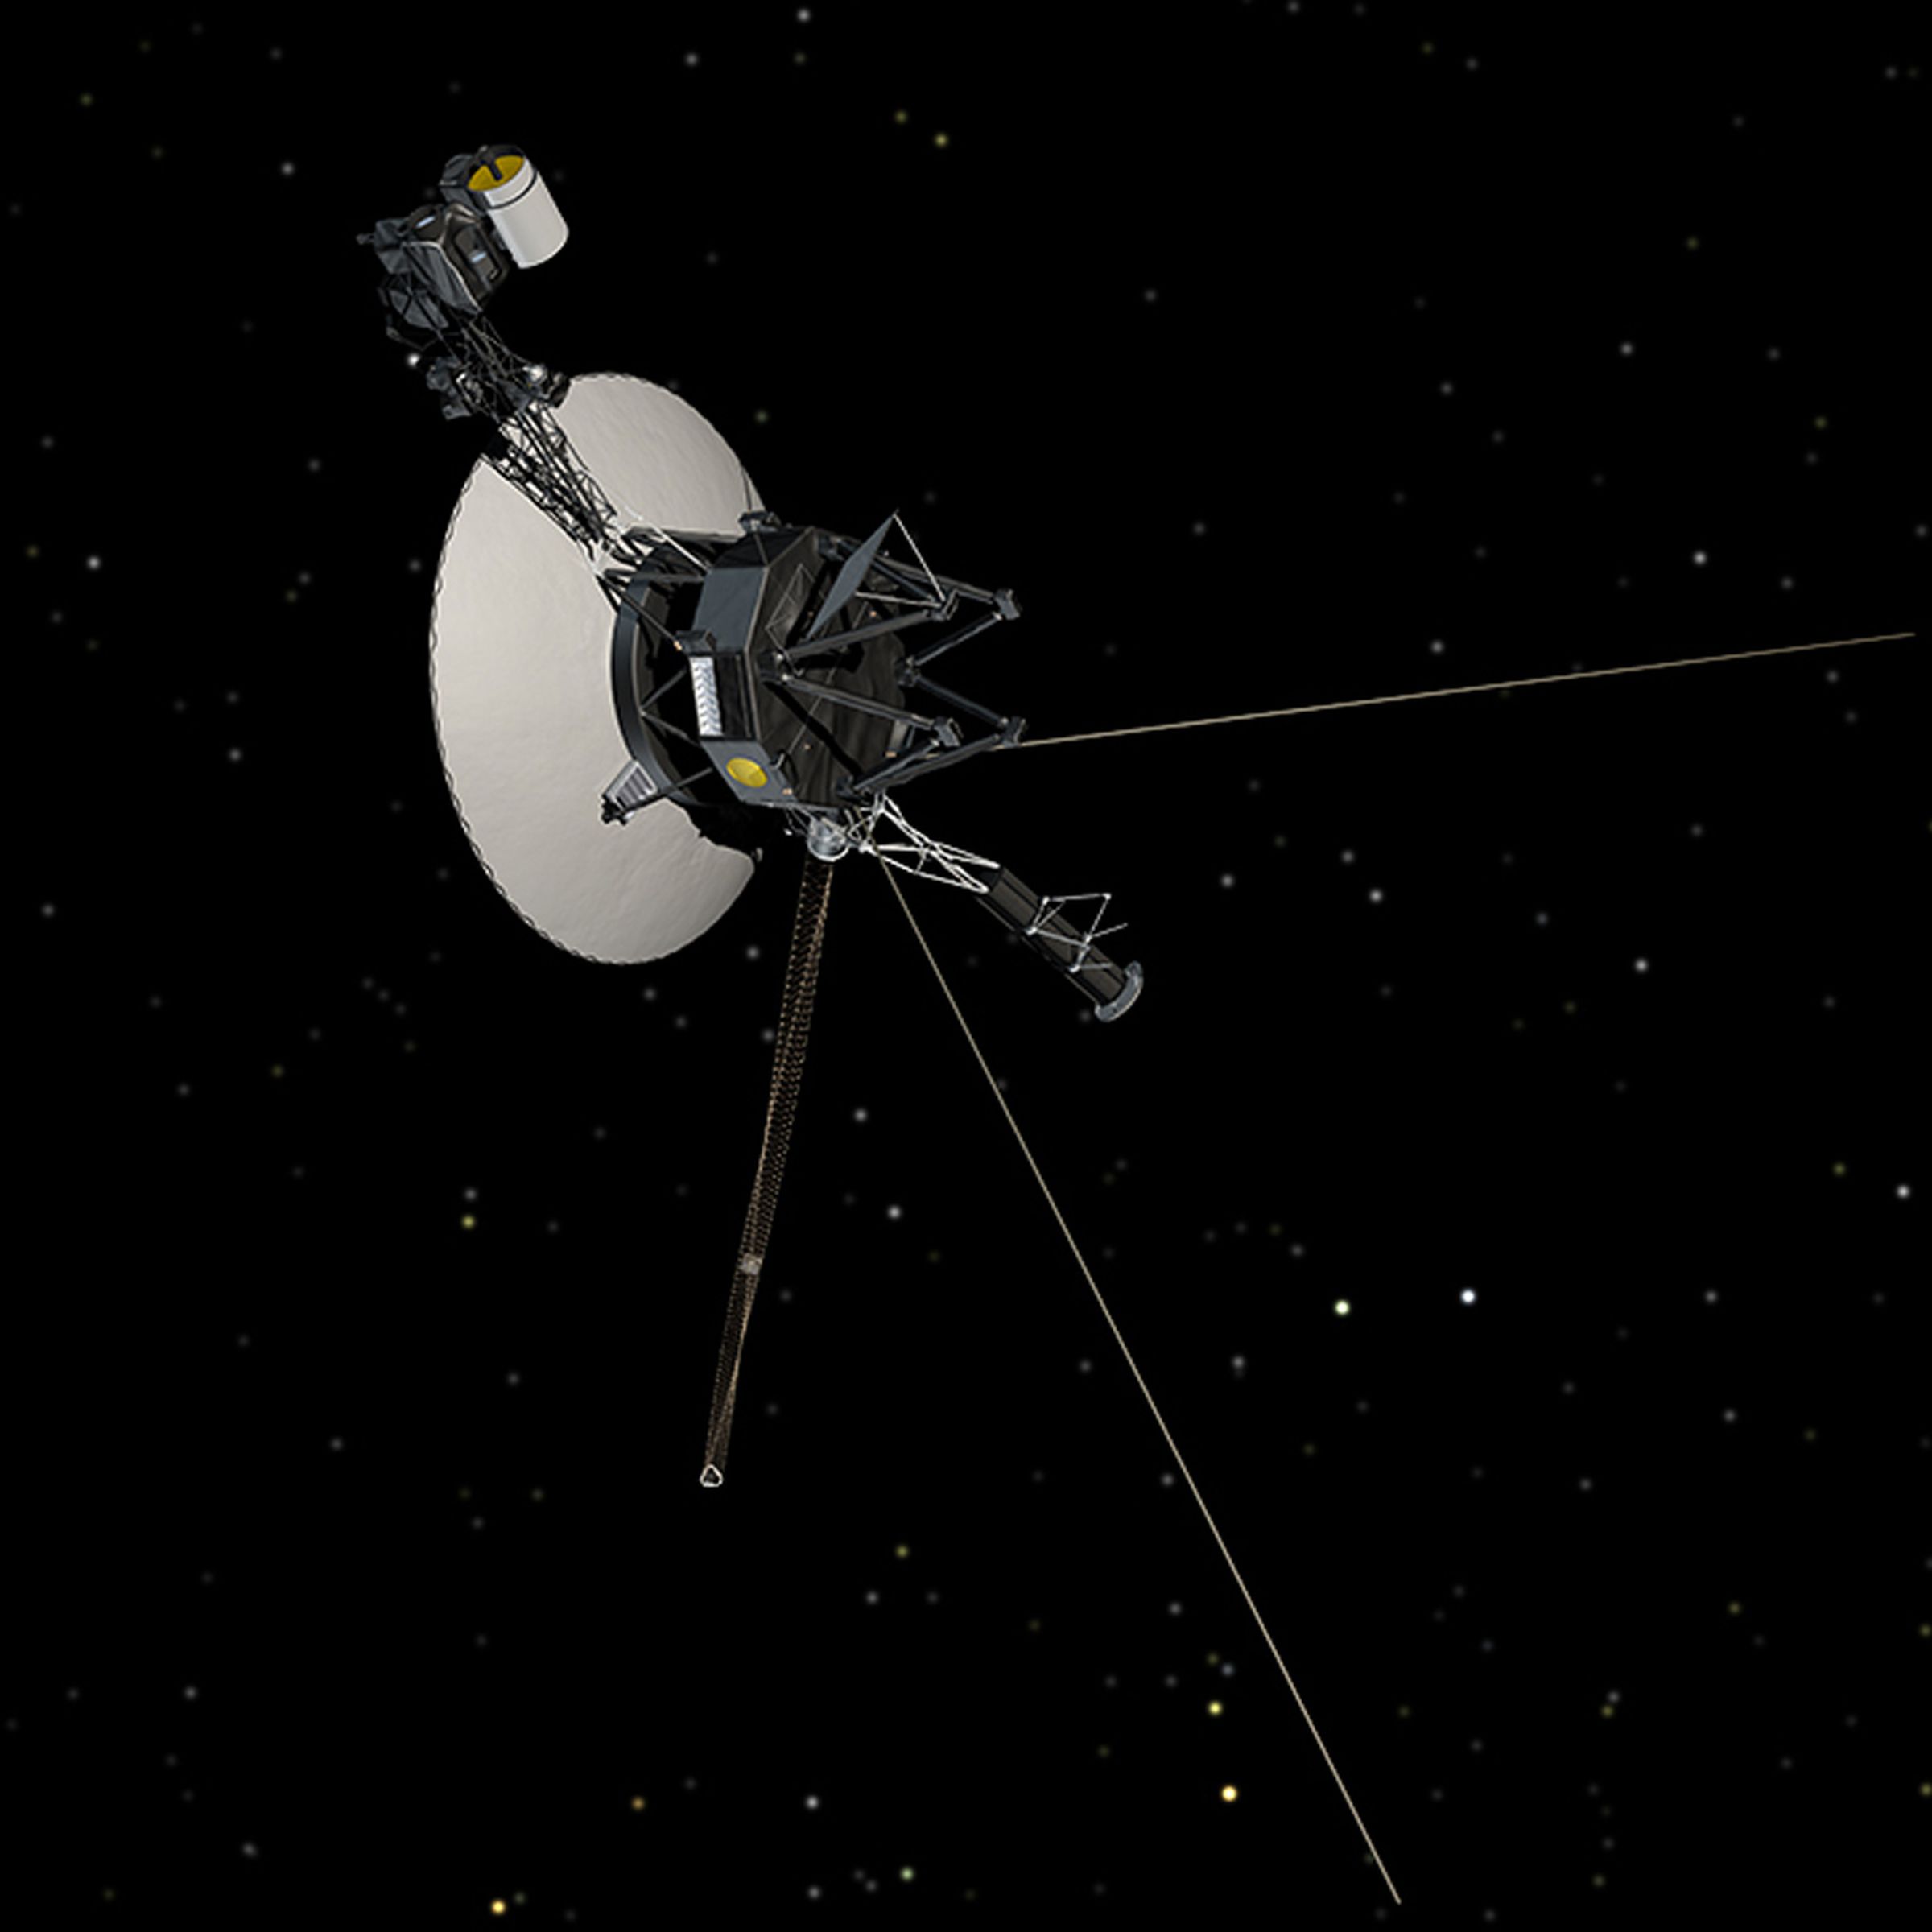 A render of Voyager 1 in space.